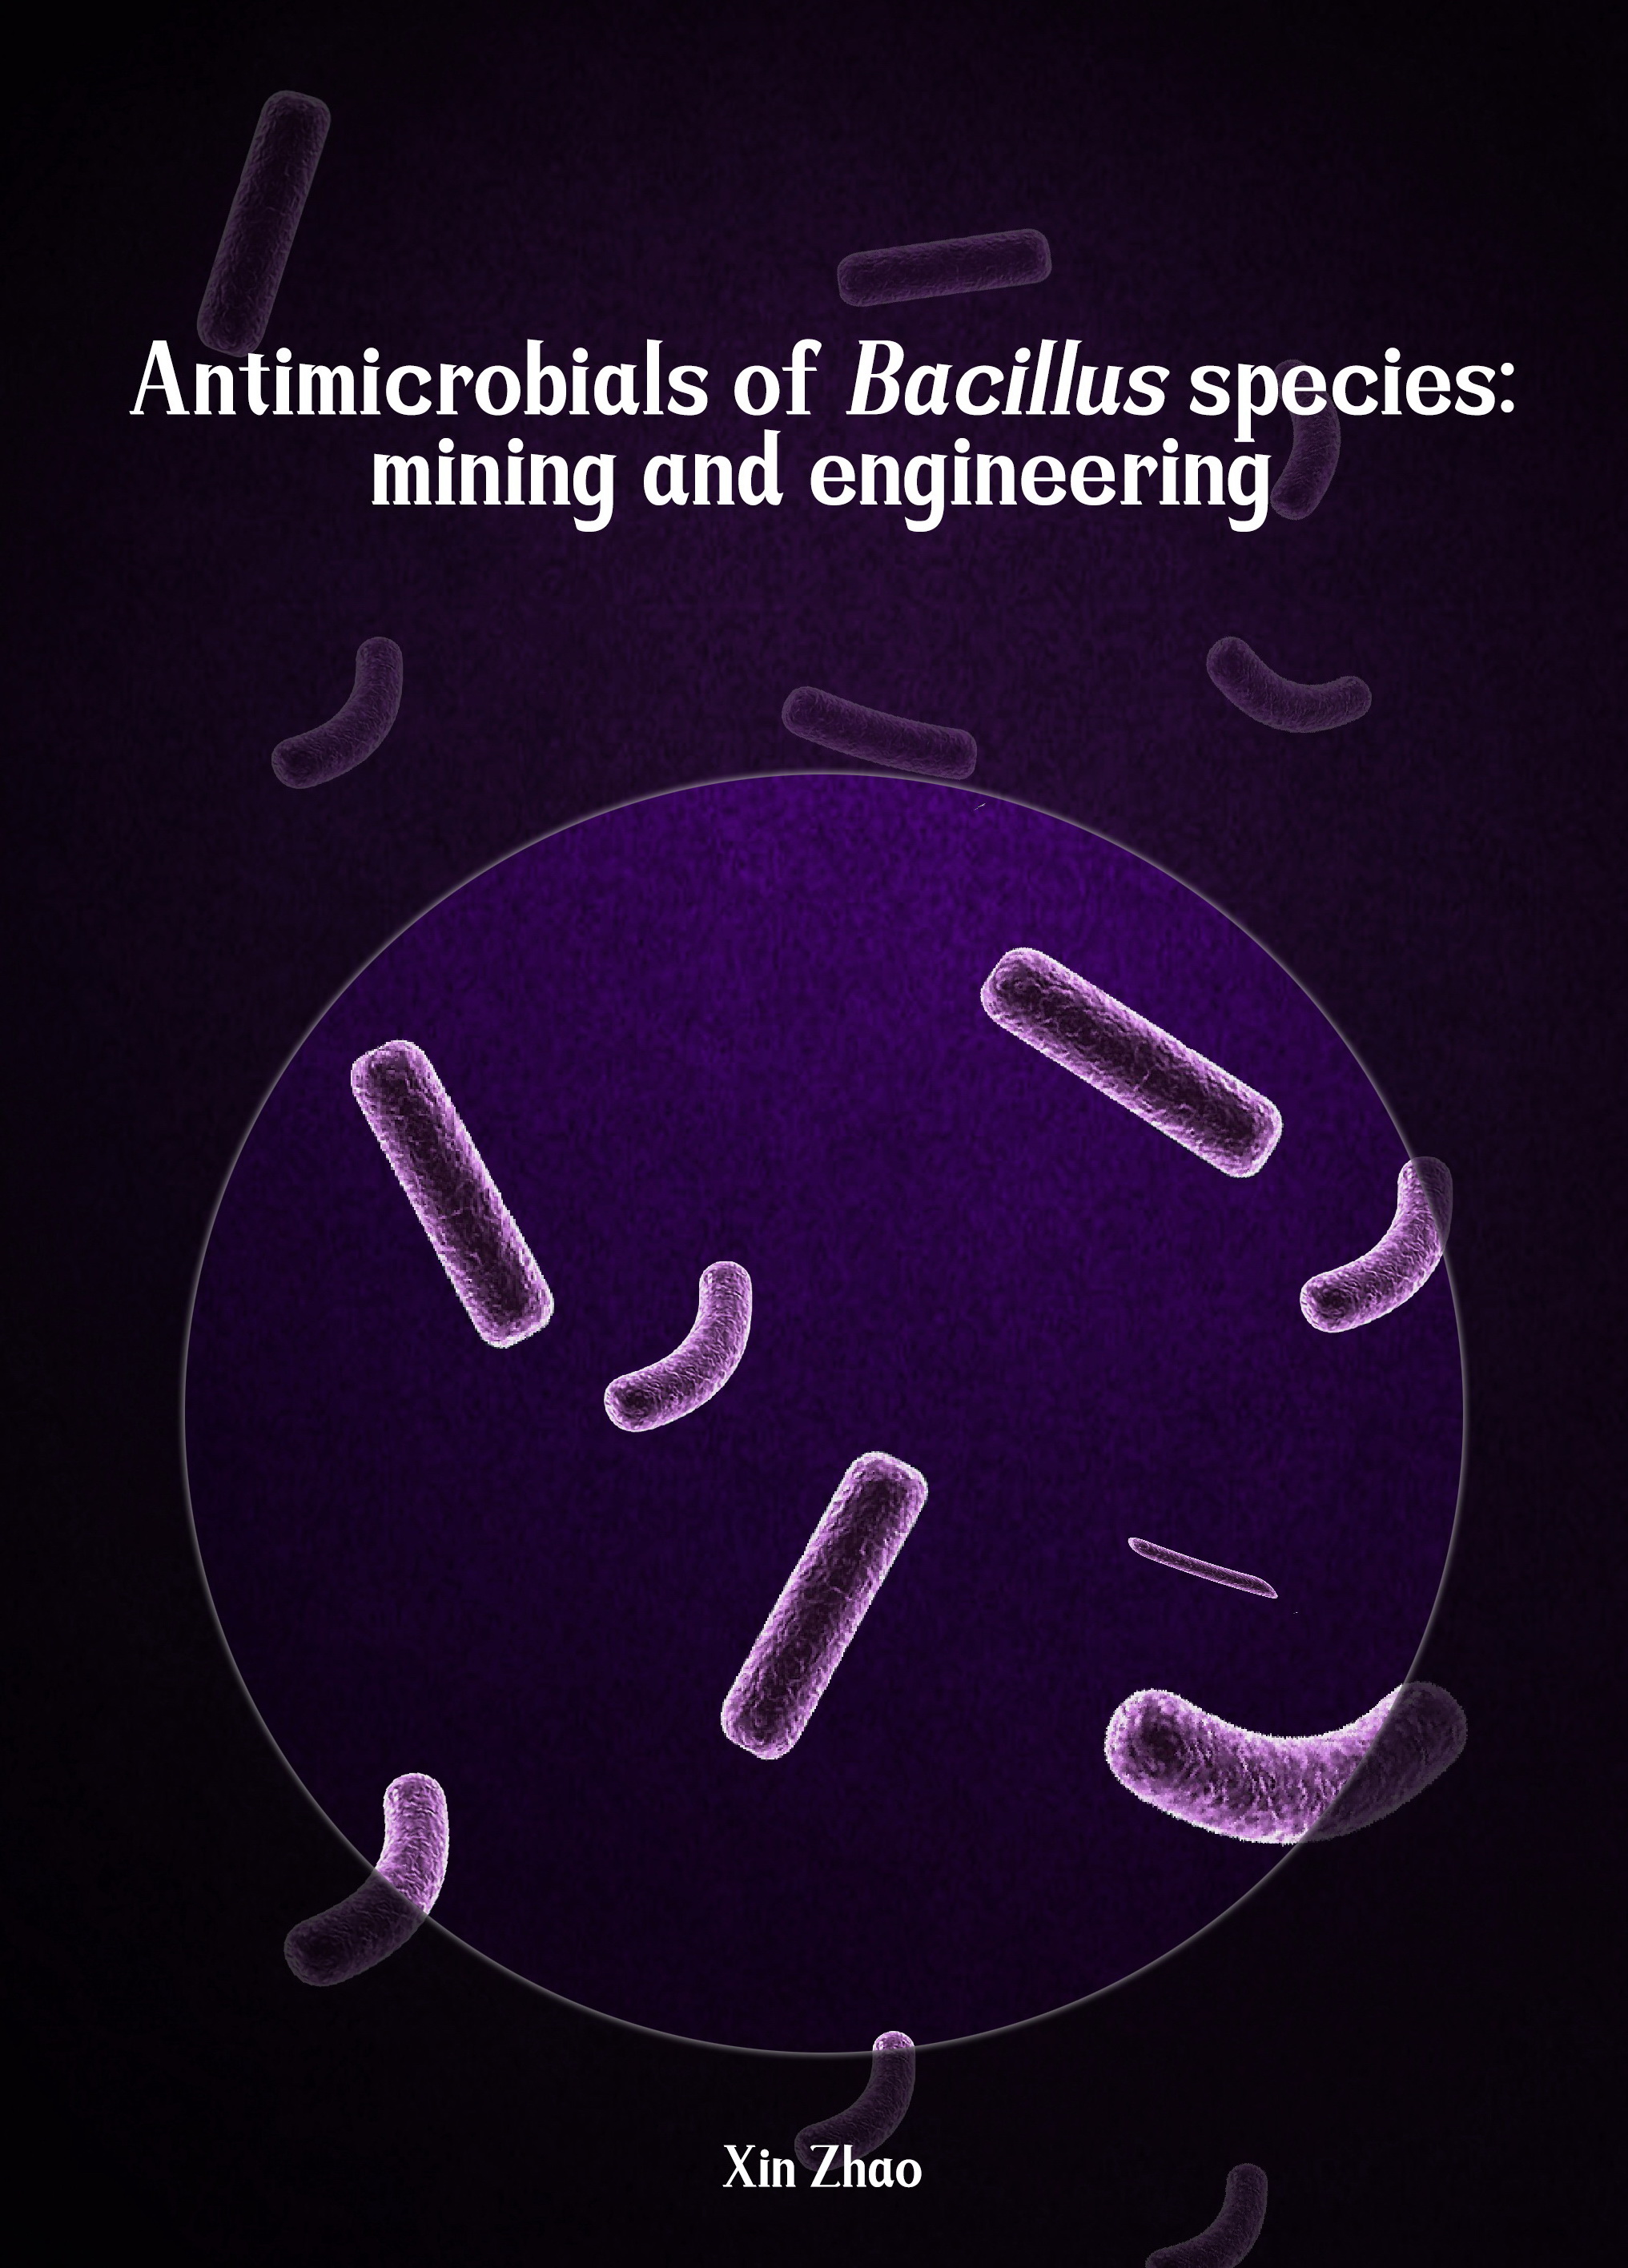 Phd thesis antimicrobial activity